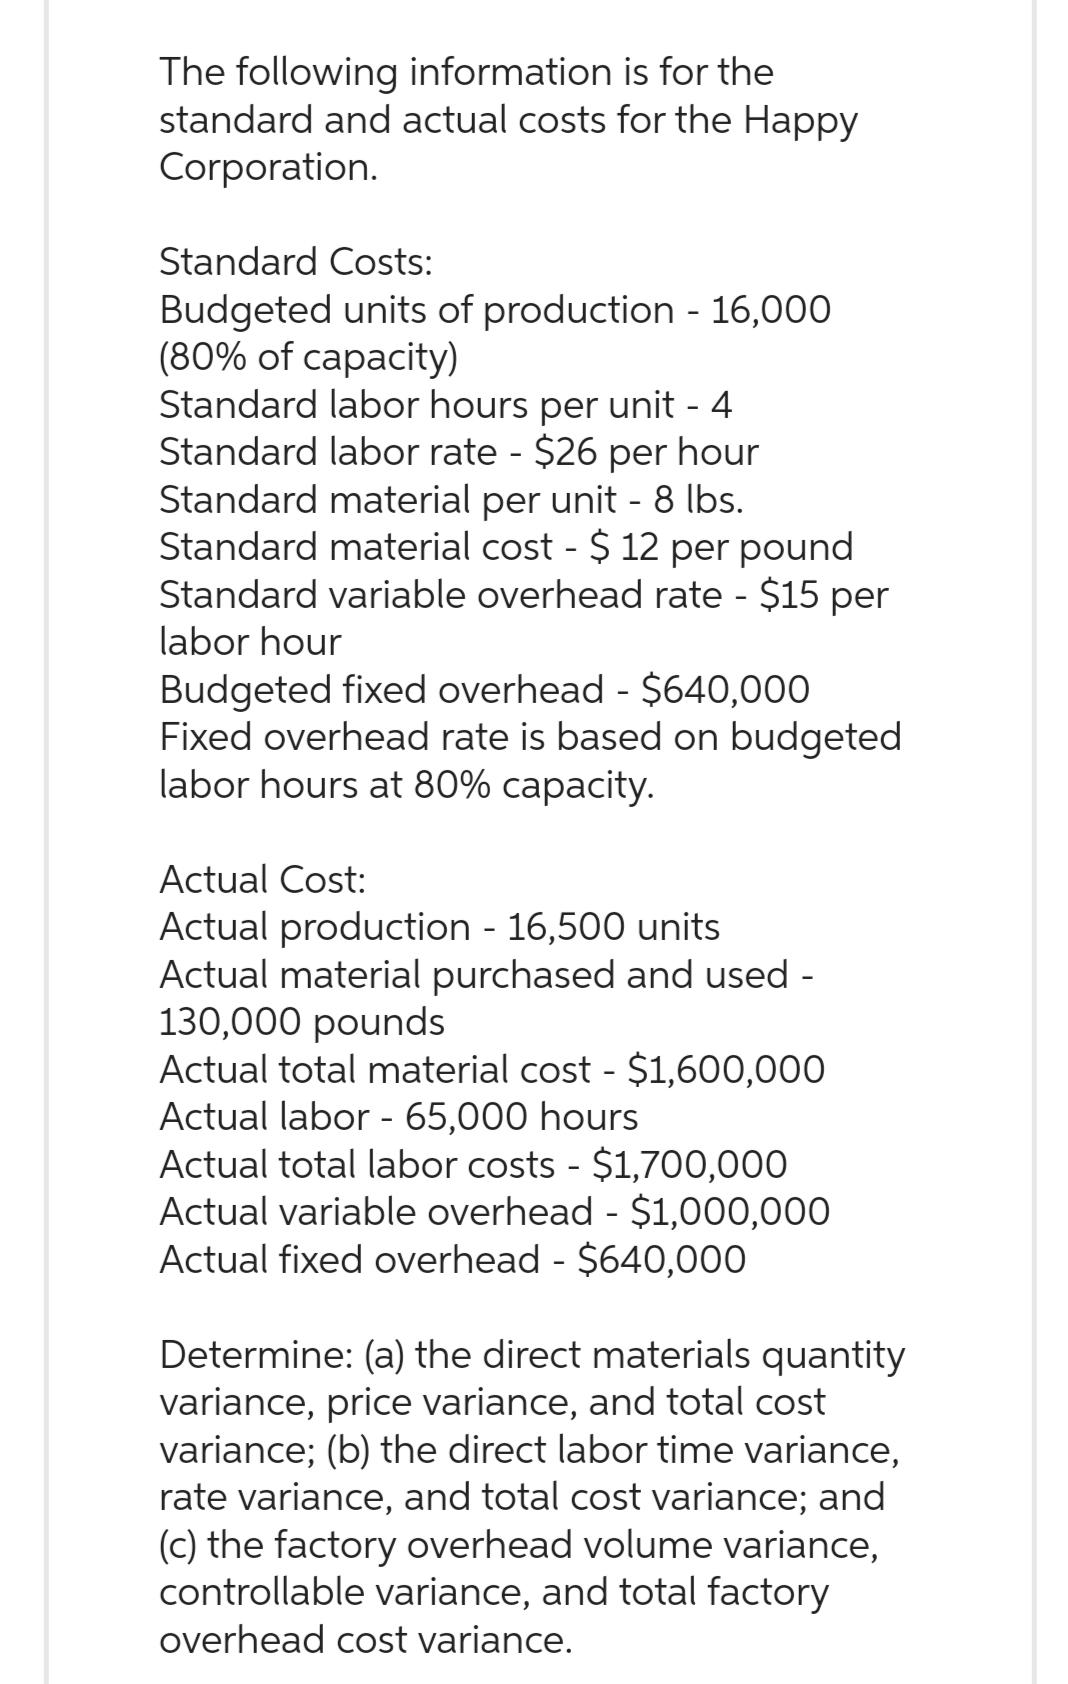 The following information is for the
standard and actual costs for the Happy
Corporation.
Standard Costs:
Budgeted units of production - 16,000
(80% of capacity)
Standard labor hours per unit - 4
Standard labor rate - $26 per hour
Standard material per unit - 8 lbs.
Standard material cost - $ 12 per pound
Standard variable overhead rate - $15 per
labor hour
Budgeted fixed overhead - $640,000
Fixed overhead rate is based on budgeted
labor hours at 80% capacity.
Actual Cost:
Actual production - 16,500 units
Actual material purchased and used -
130,000 pounds
Actual total material cost - $1,600,000
Actual labor - 65,000 hours
Actual total labor costs - $1,700,000
Actual variable overhead - $1,000,000
Actual fixed overhead - $640,000
Determine: (a) the direct materials quantity
variance, price variance, and total cost
variance; (b) the direct labor time variance,
rate variance, and total cost variance; and
(c) the factory overhead volume variance,
controllable variance, and total factory
overhead cost variance.